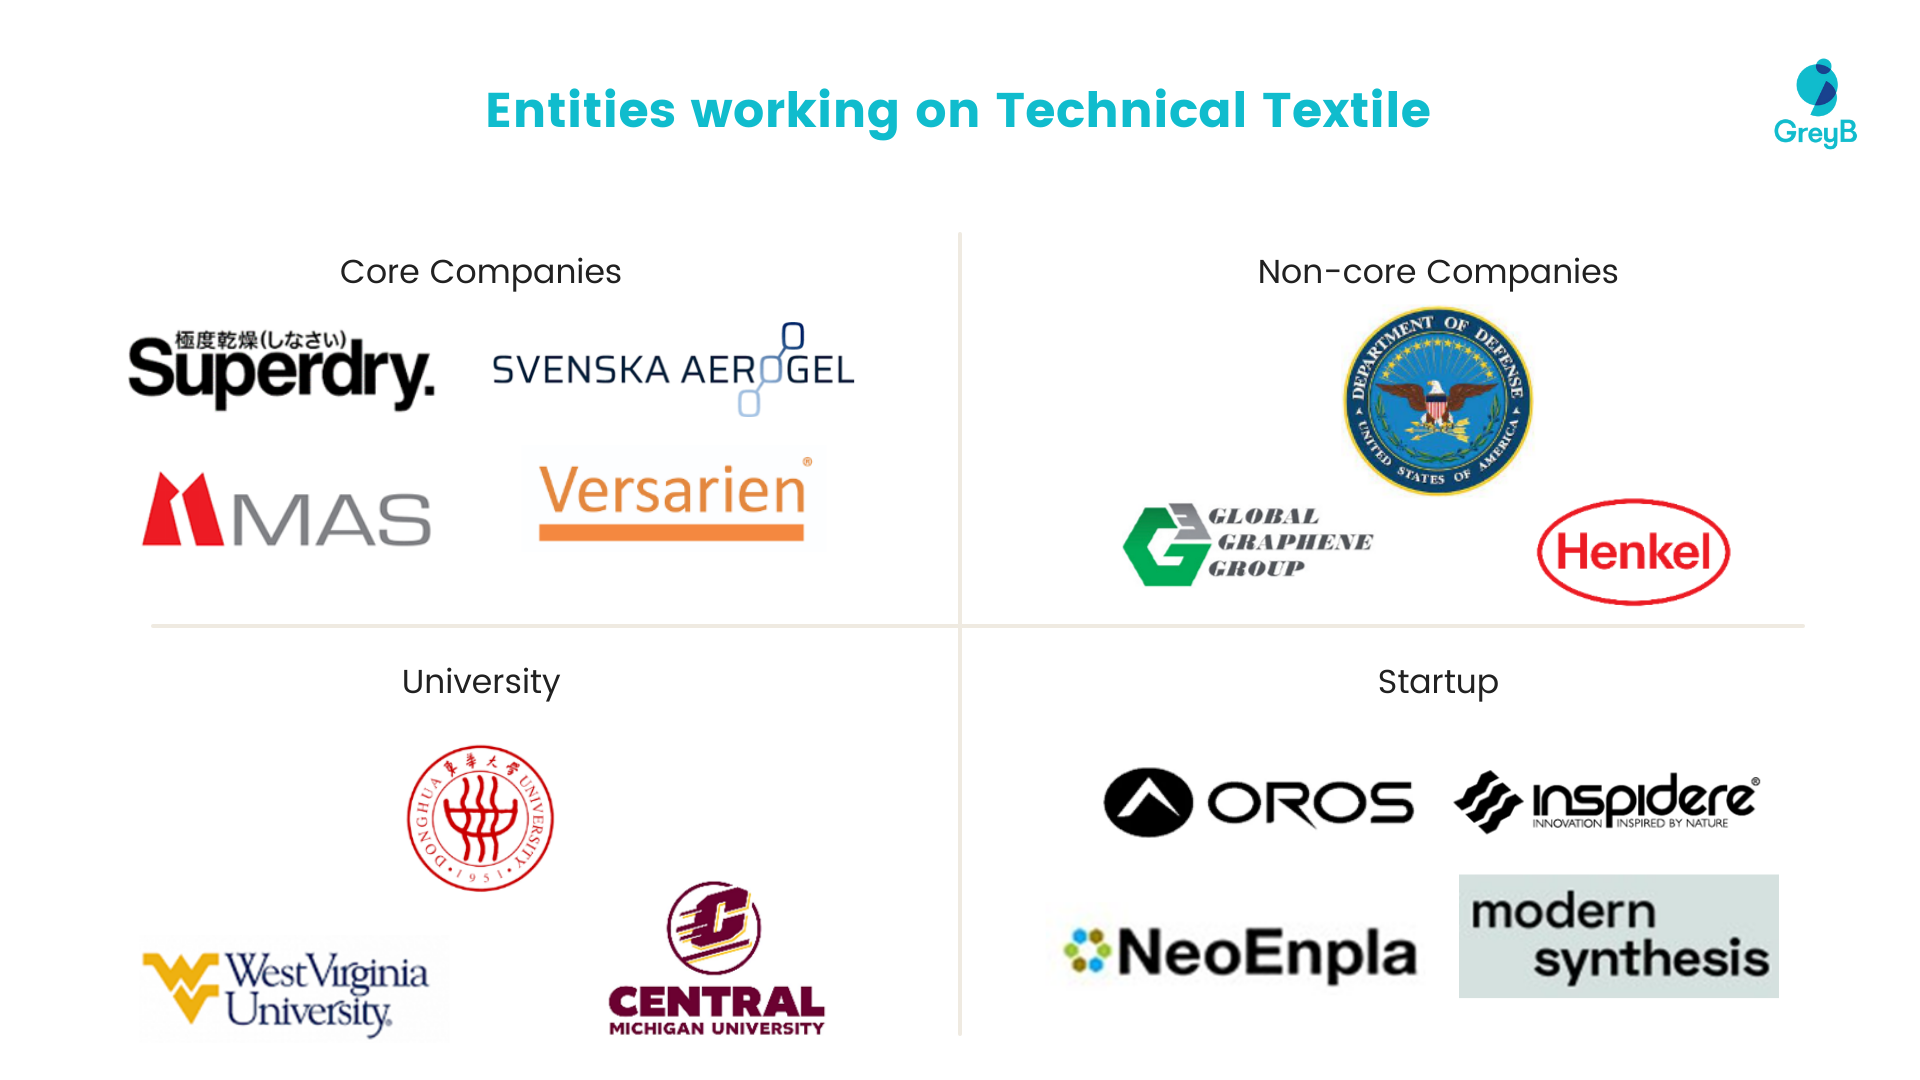 Entities working on Technical Textile